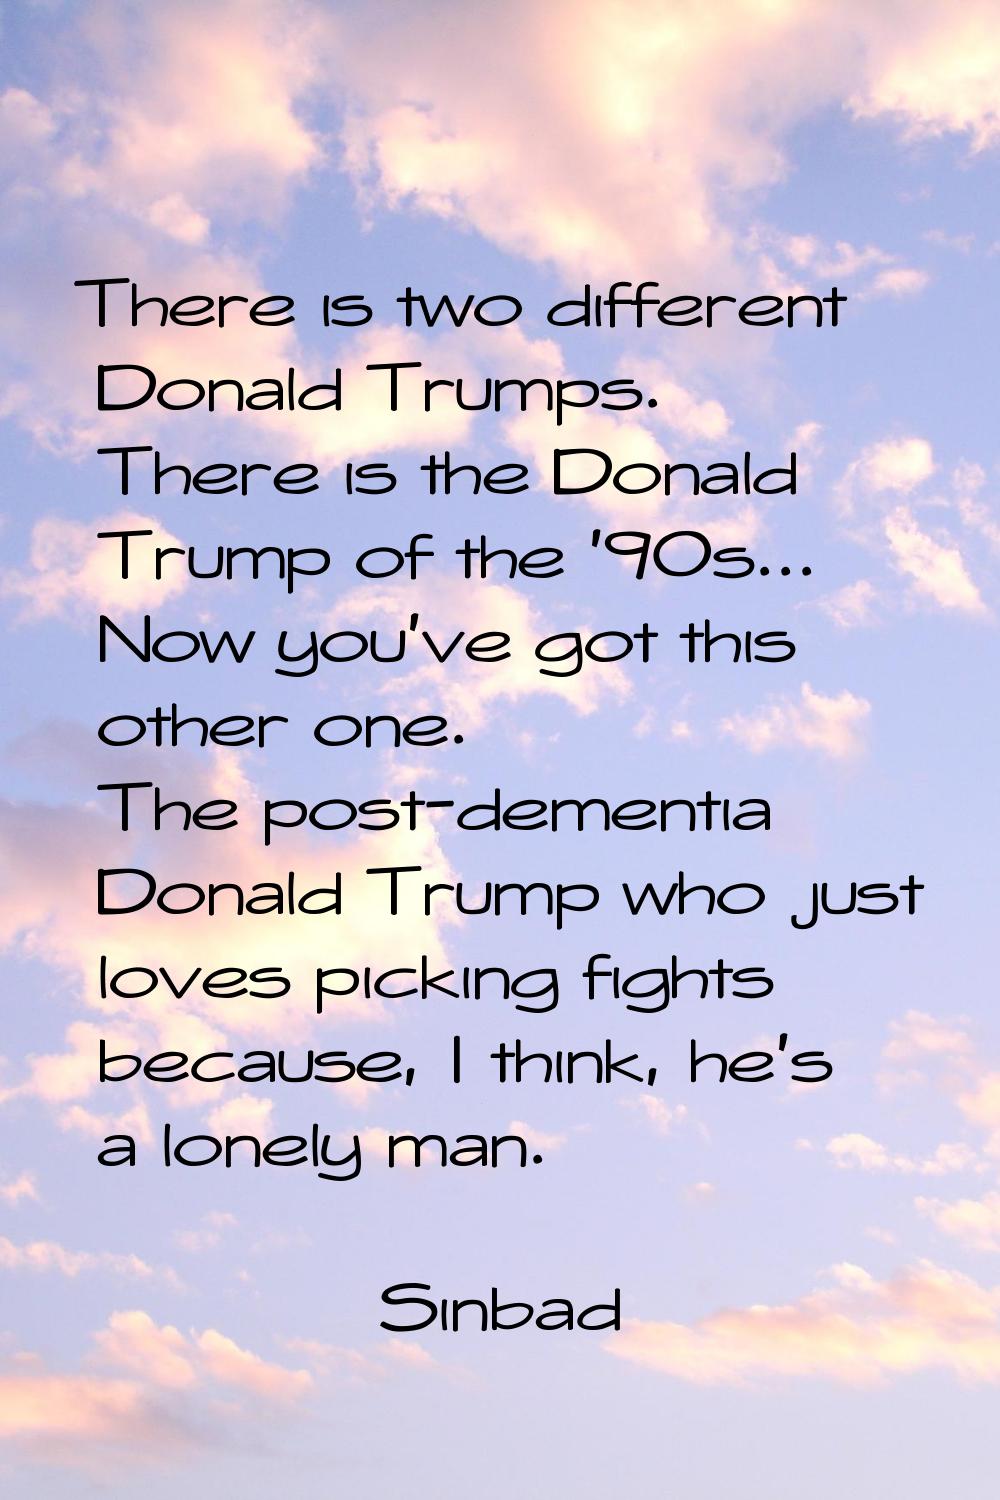 There is two different Donald Trumps. There is the Donald Trump of the '90s... Now you've got this 